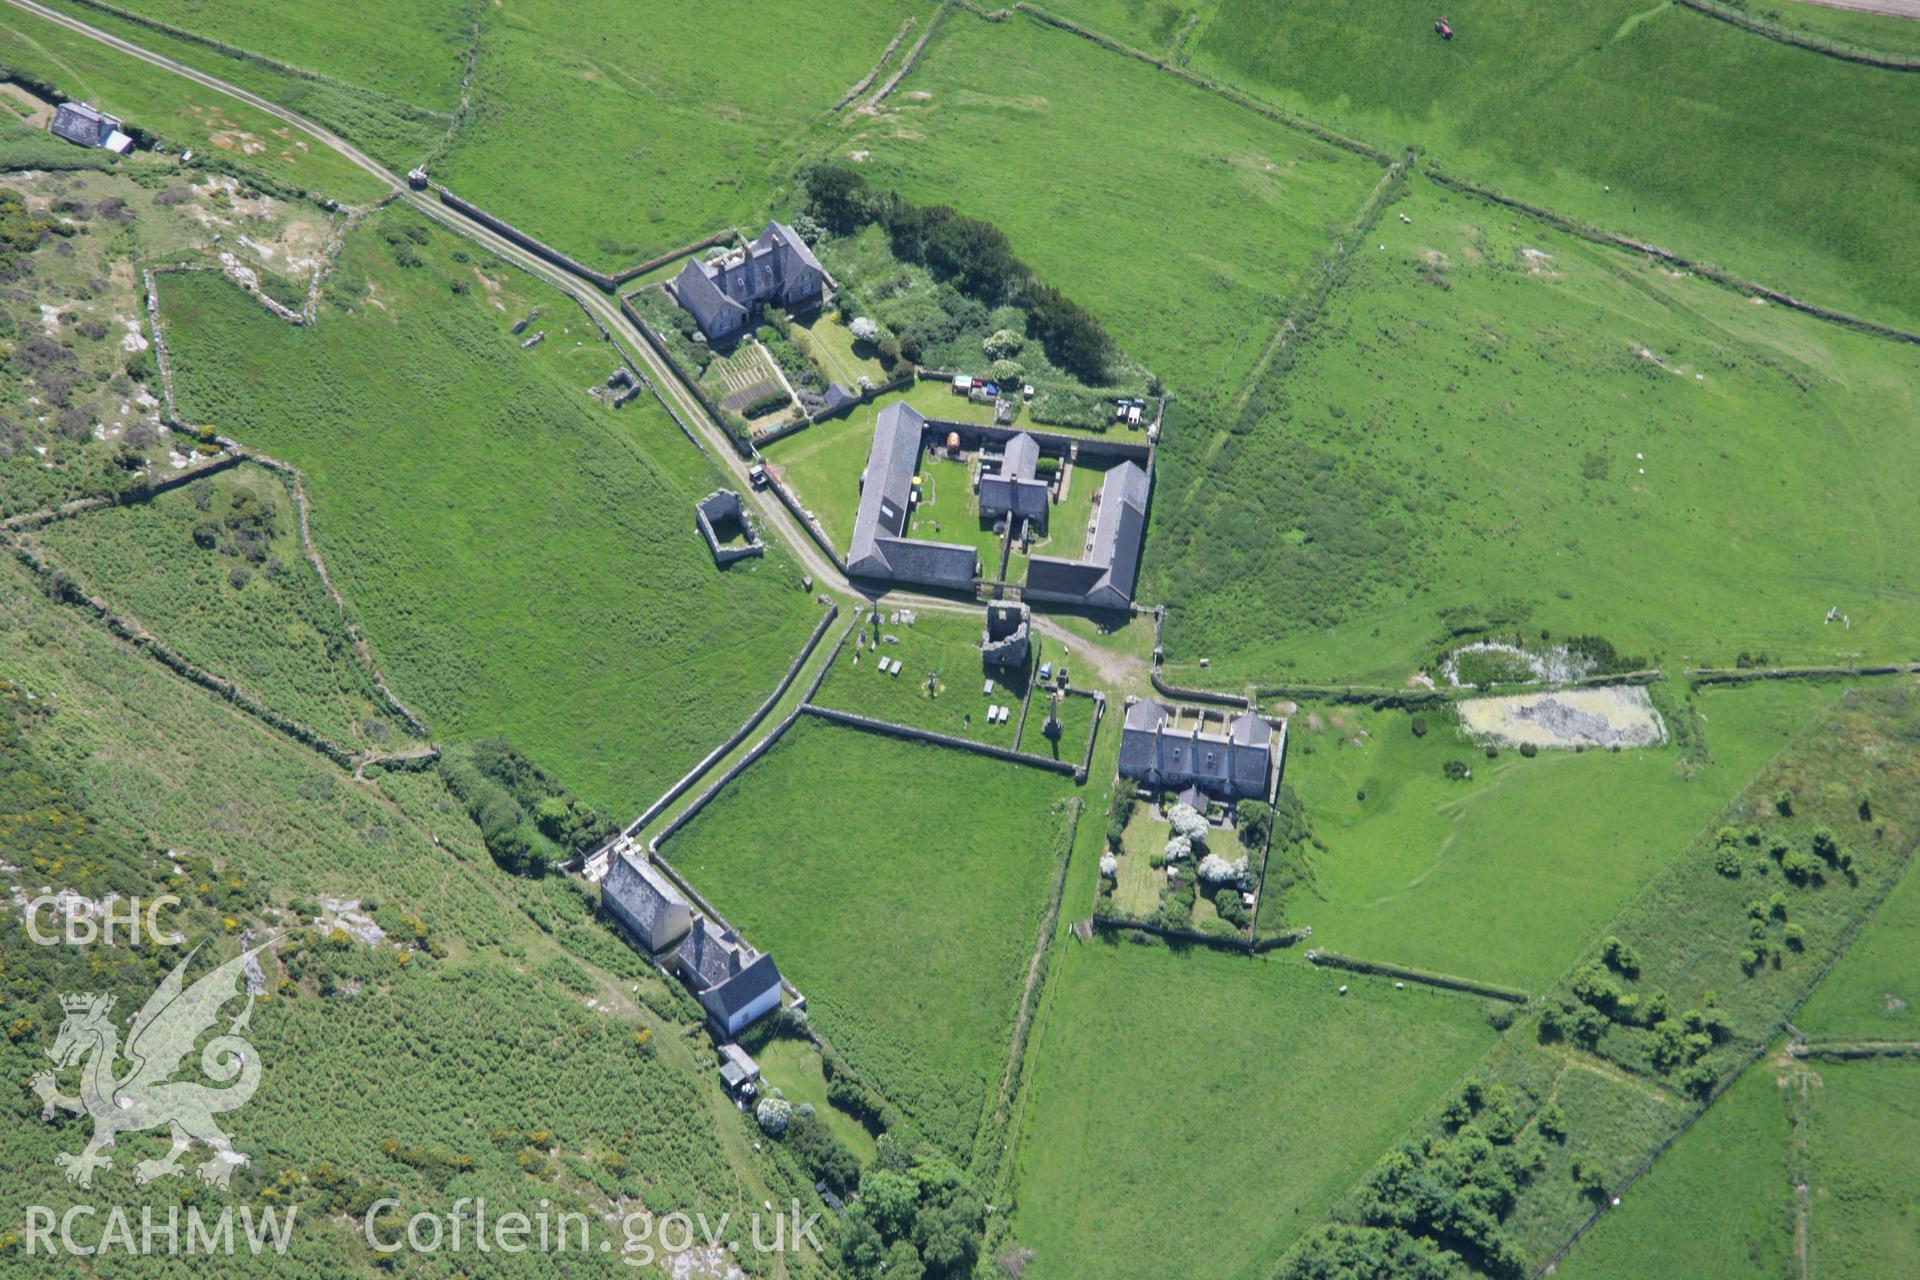 RCAHMW colour oblique aerial photograph of St Mary's Abbey, Bardsey Island, from the north-east. Taken on 14 June 2006 by Toby Driver.